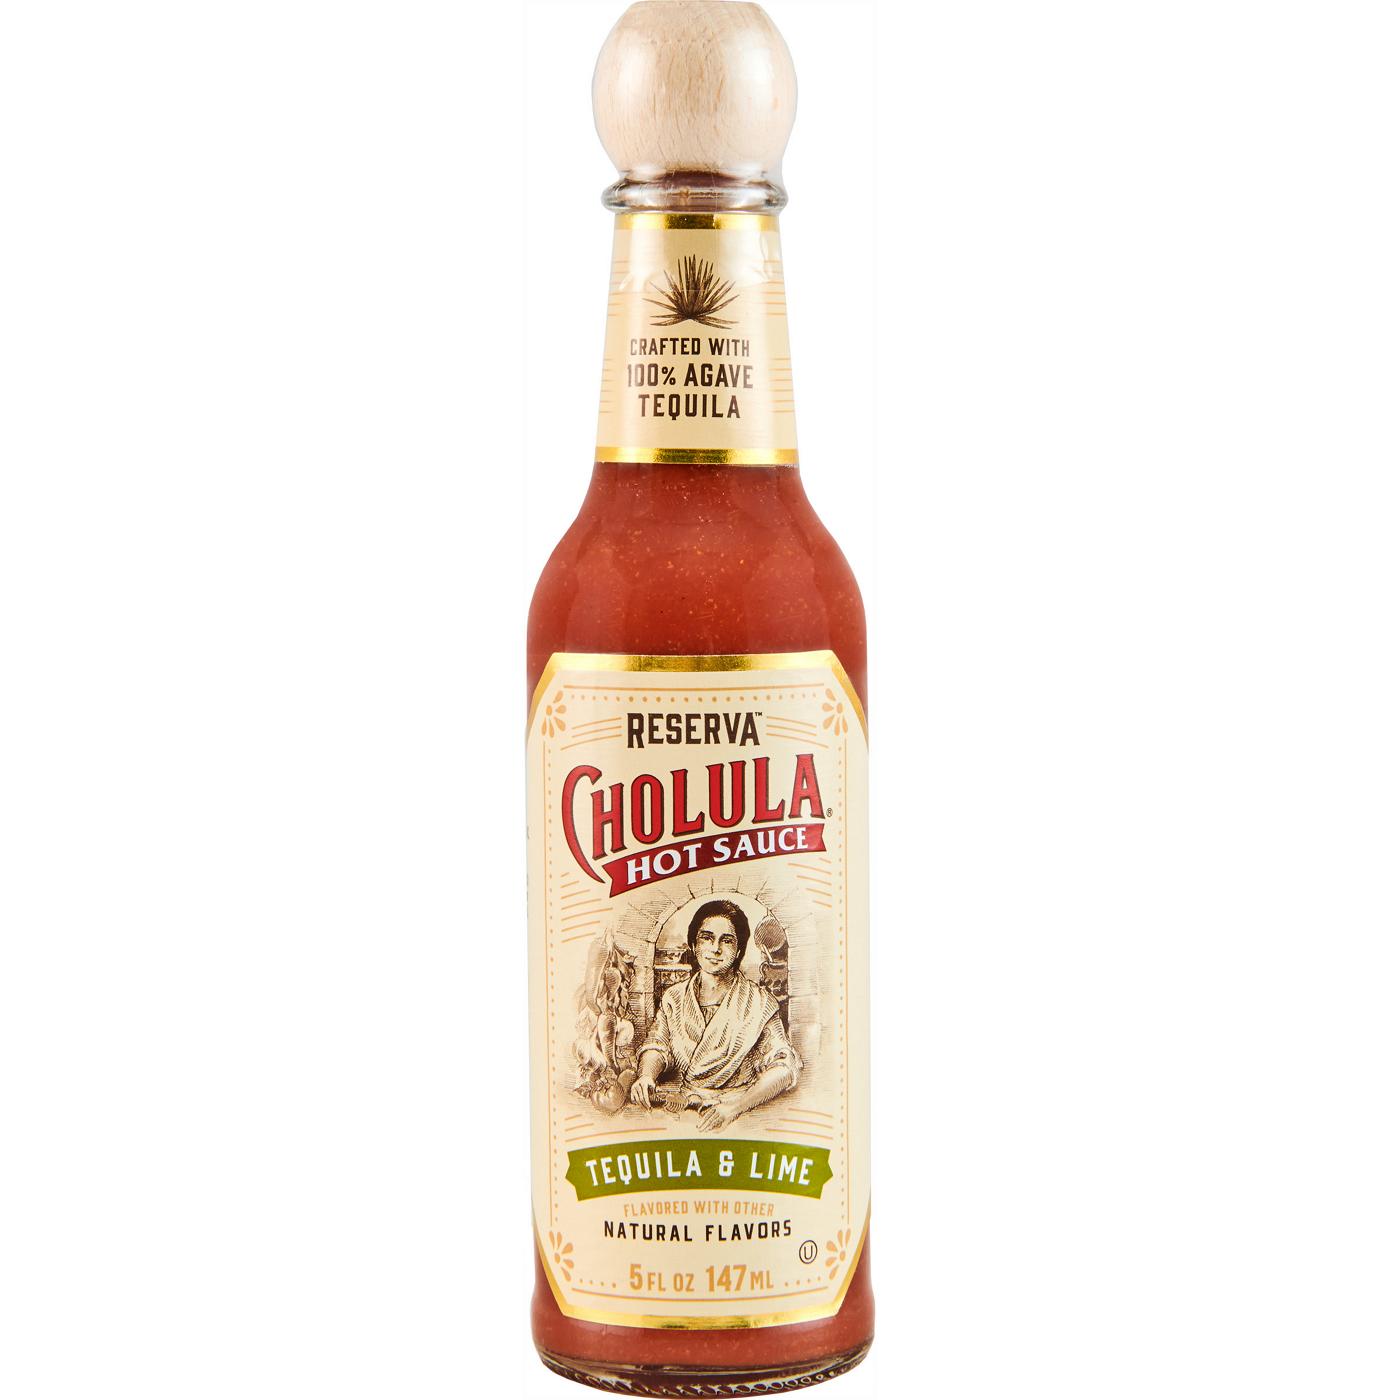 Cholula Cholula® Reserva Tequila & Lime Flavored with Other Natural Flavors Hot Sauce, 5 fl oz Hot Sauce; image 1 of 7